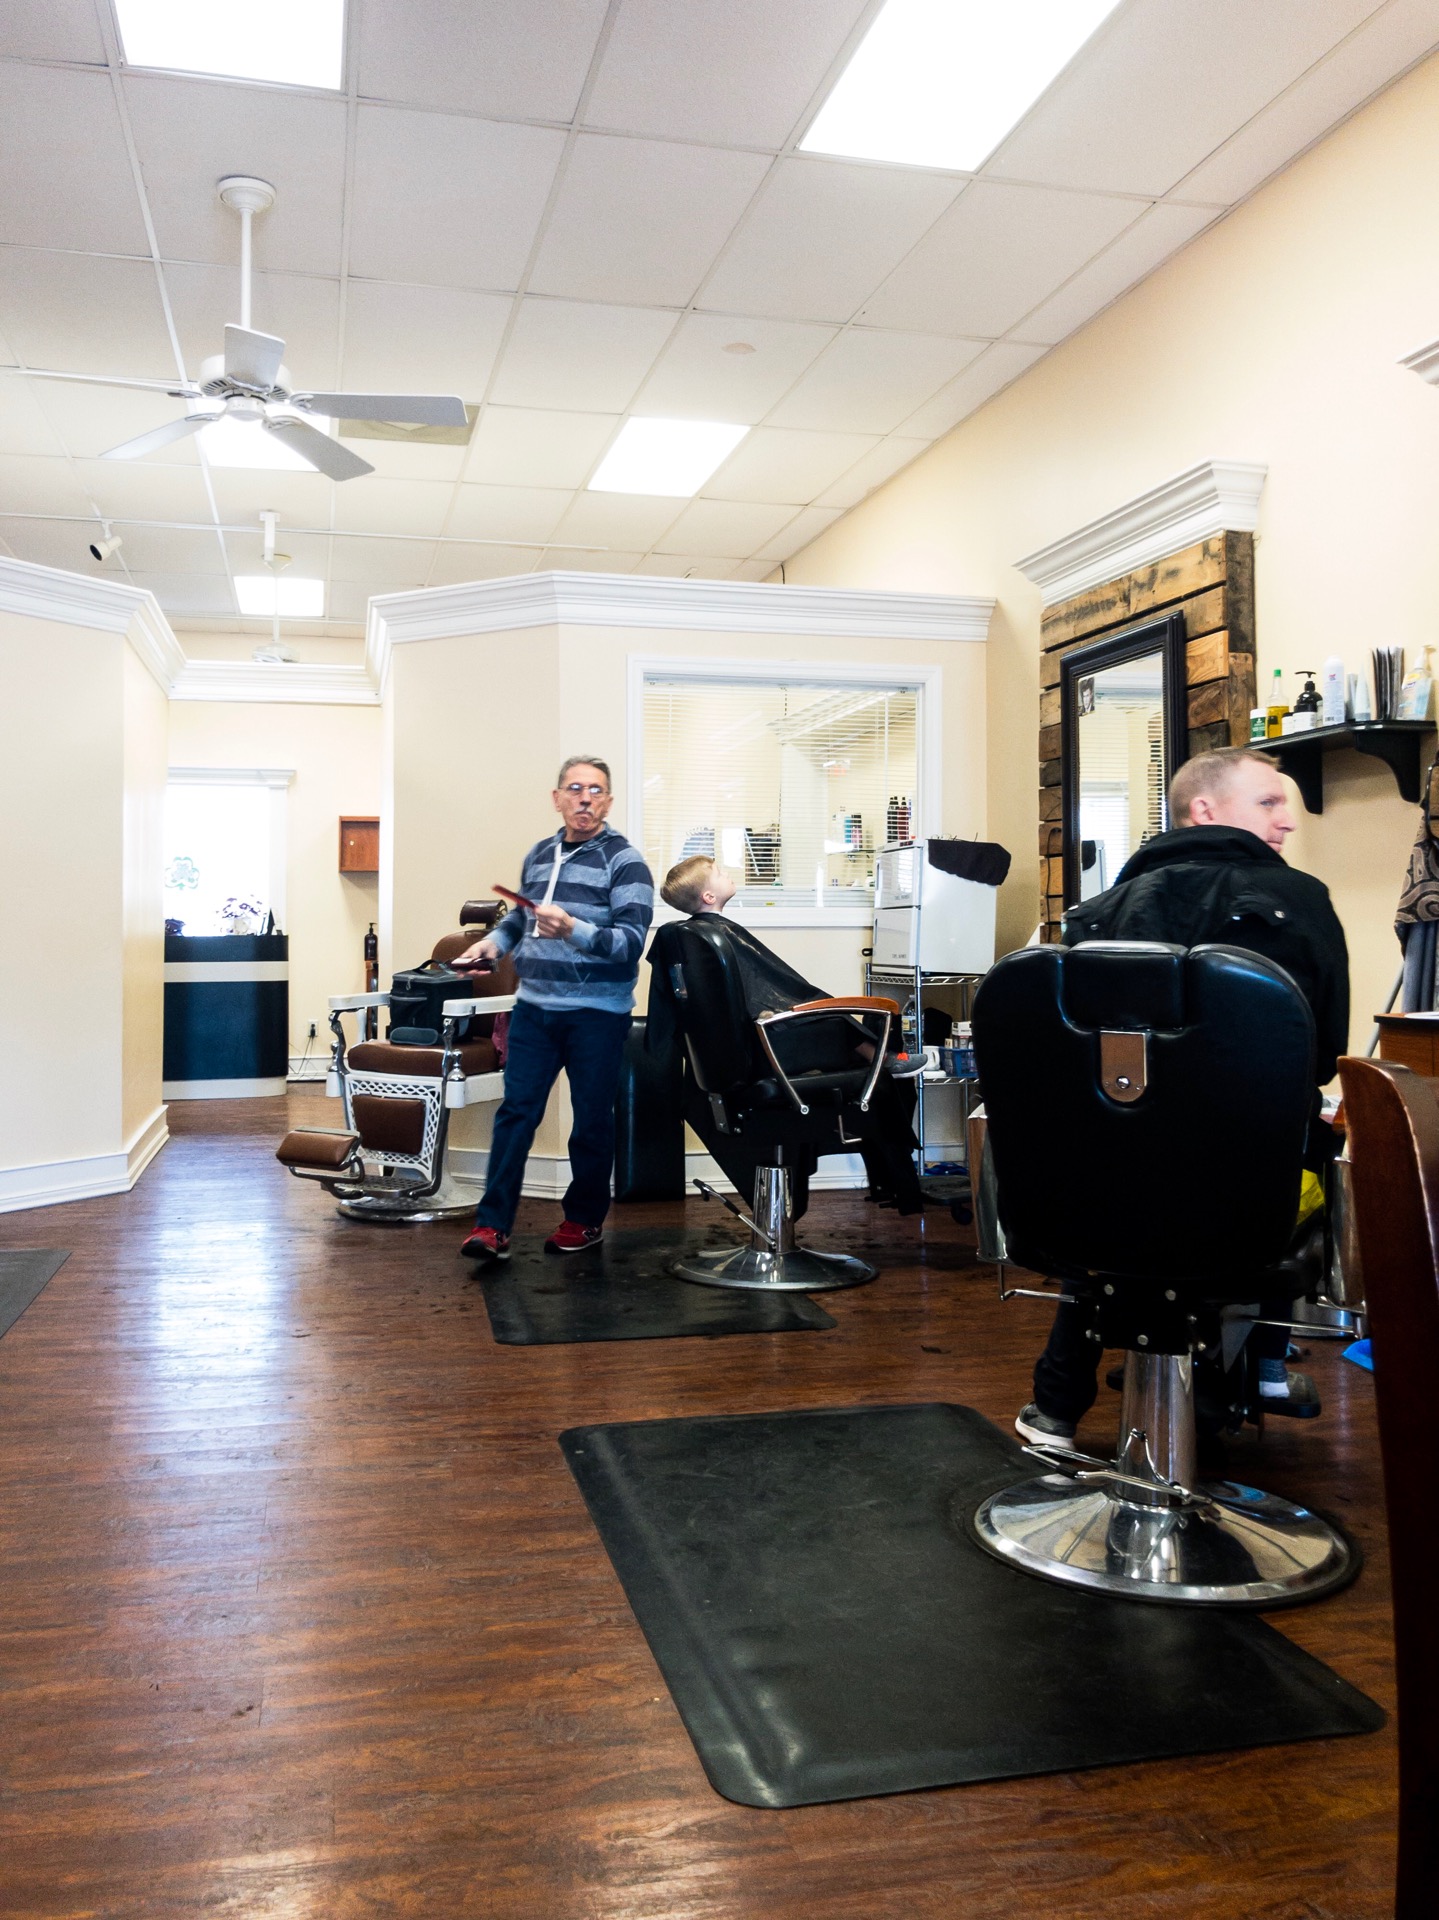 Checked in at MetroMale Barbering II